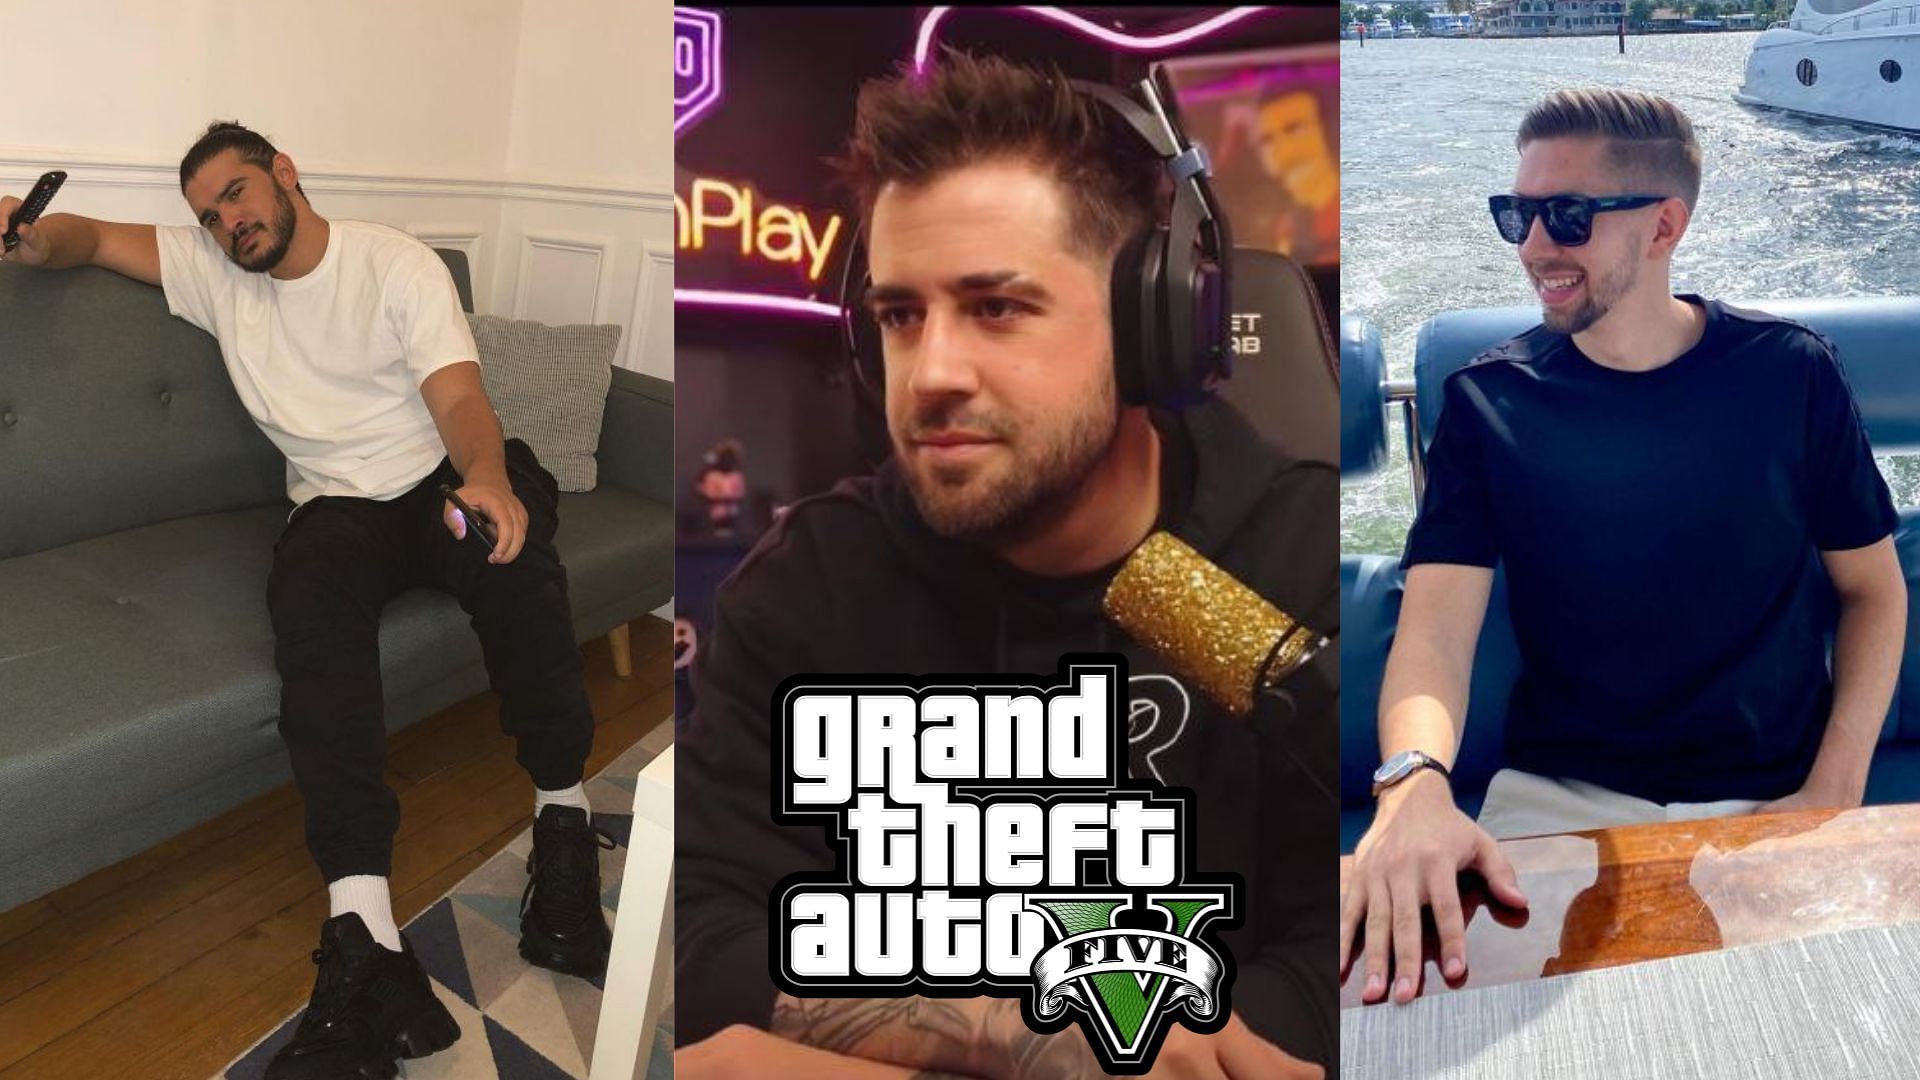 GTA 5 RP streamers on Twitch